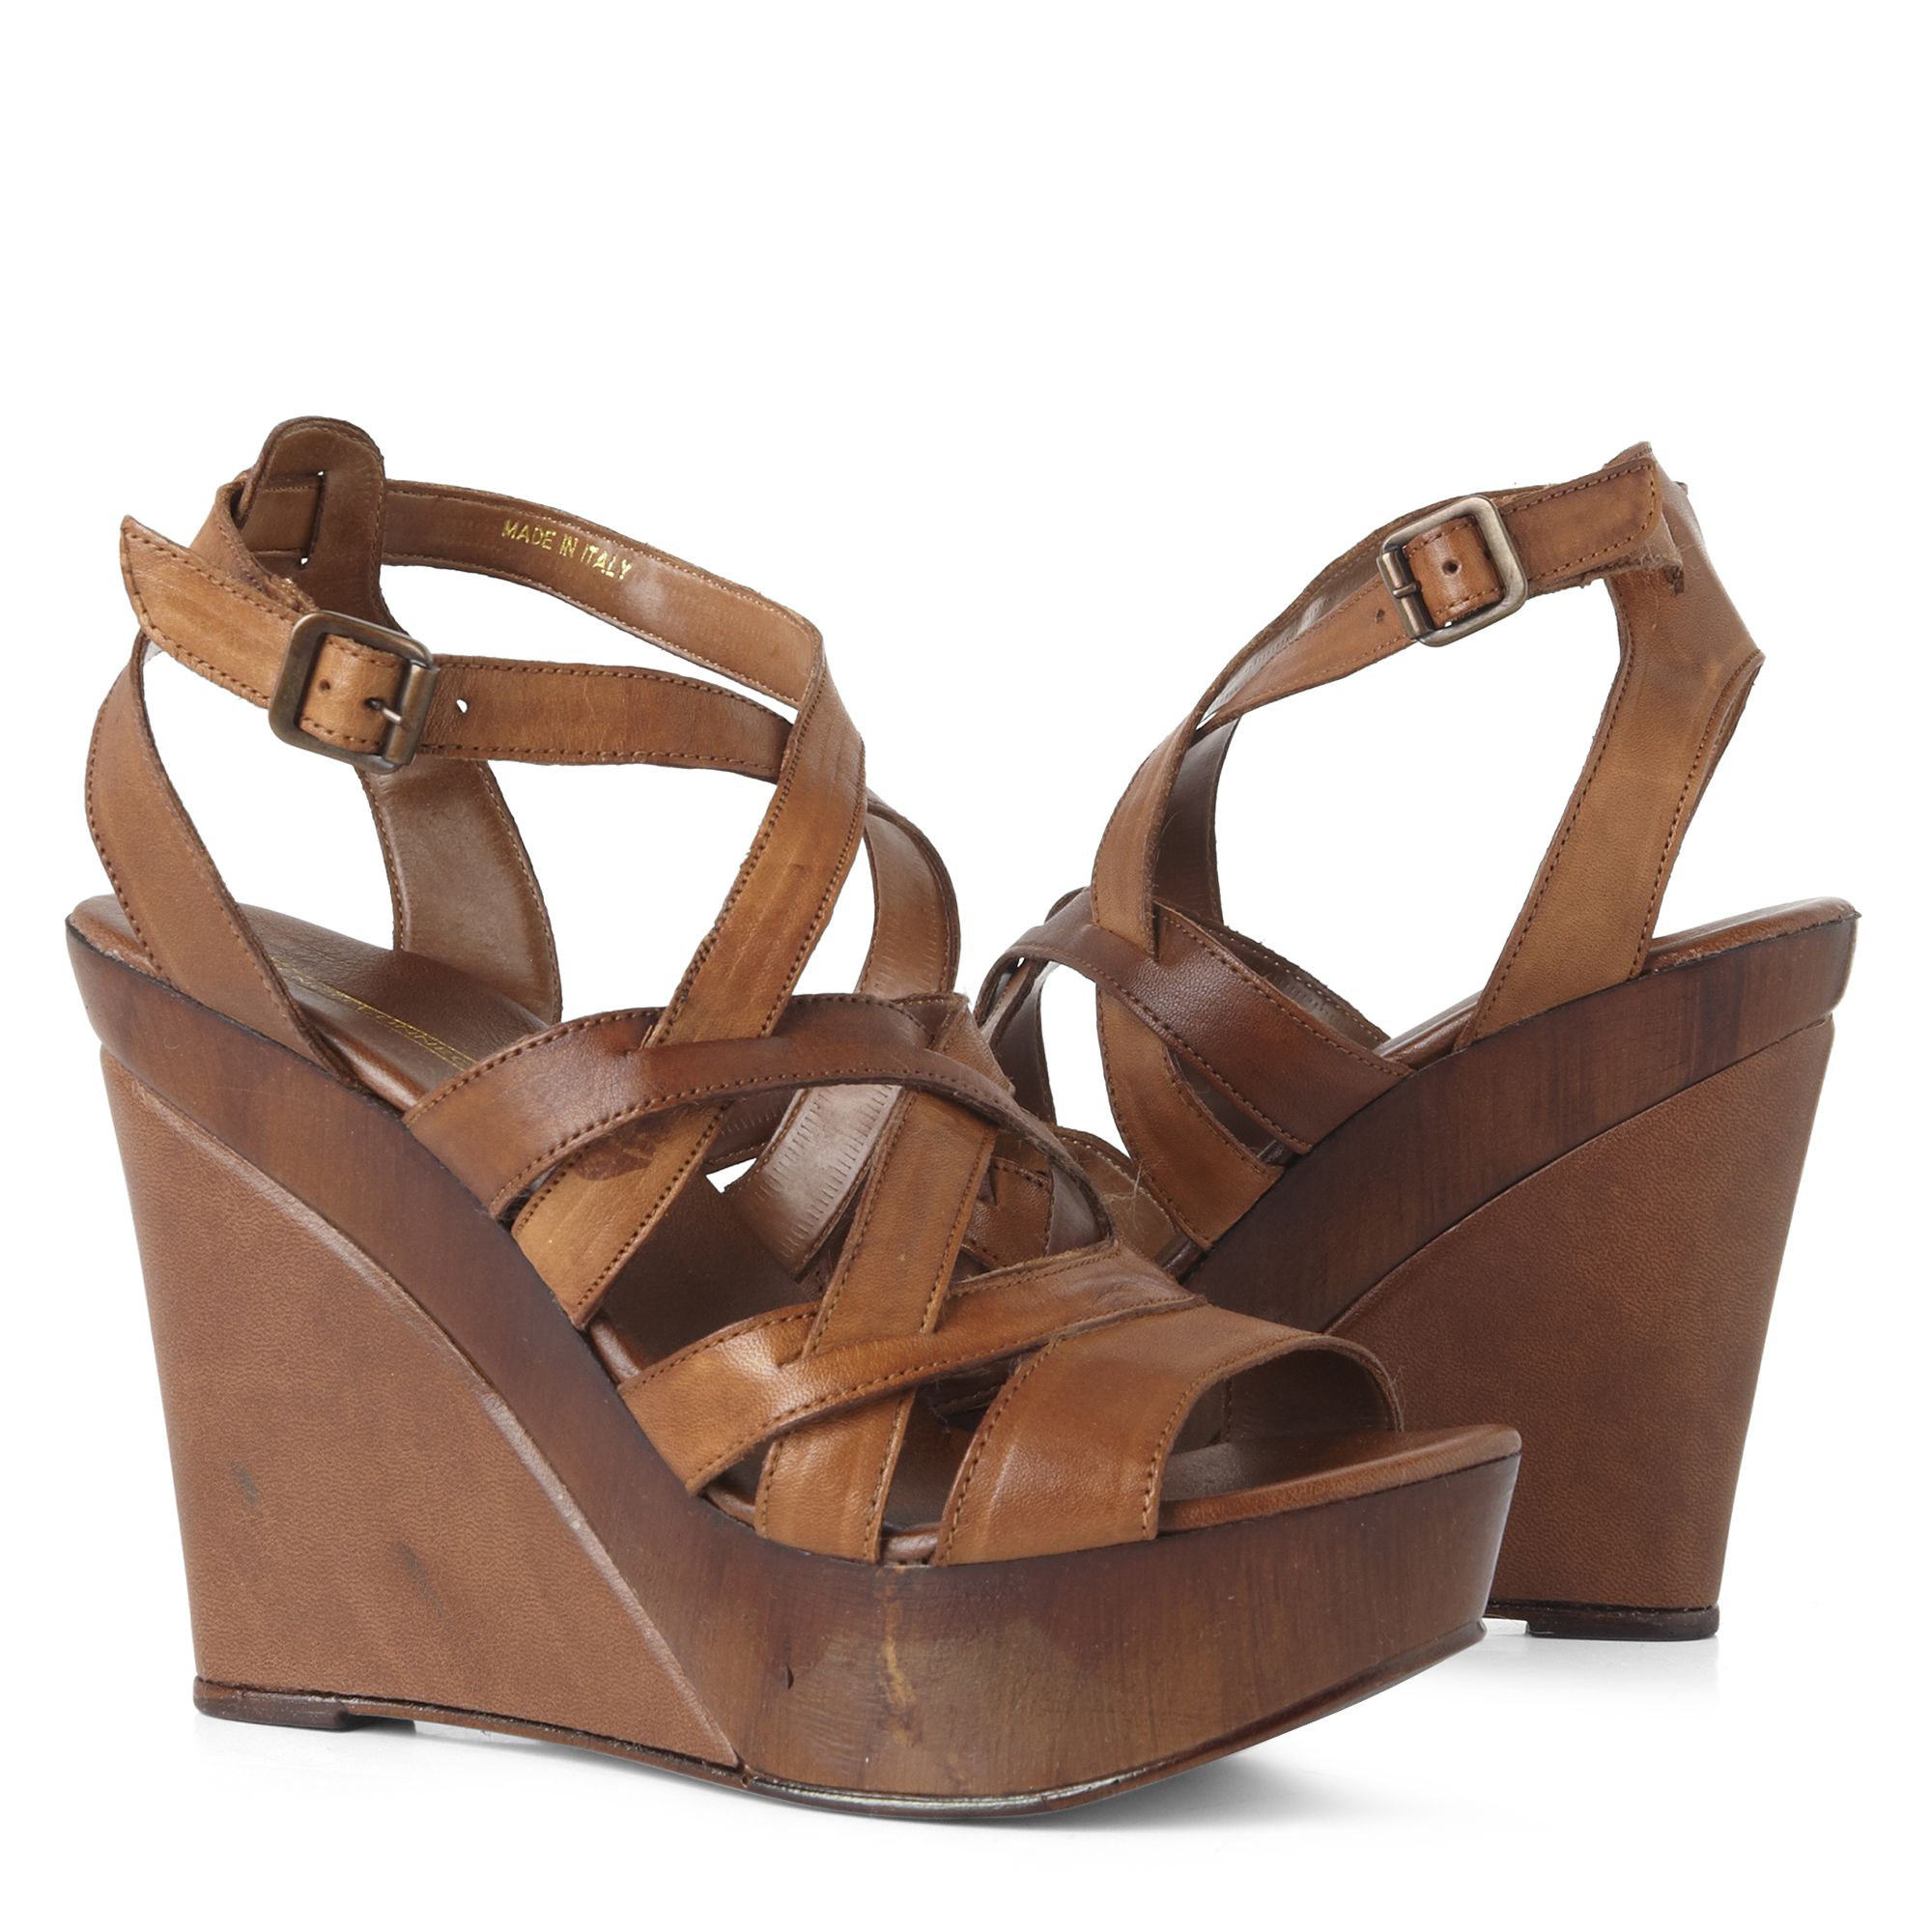 French Connection Dahlia Wedge Sandals in Brown | Lyst